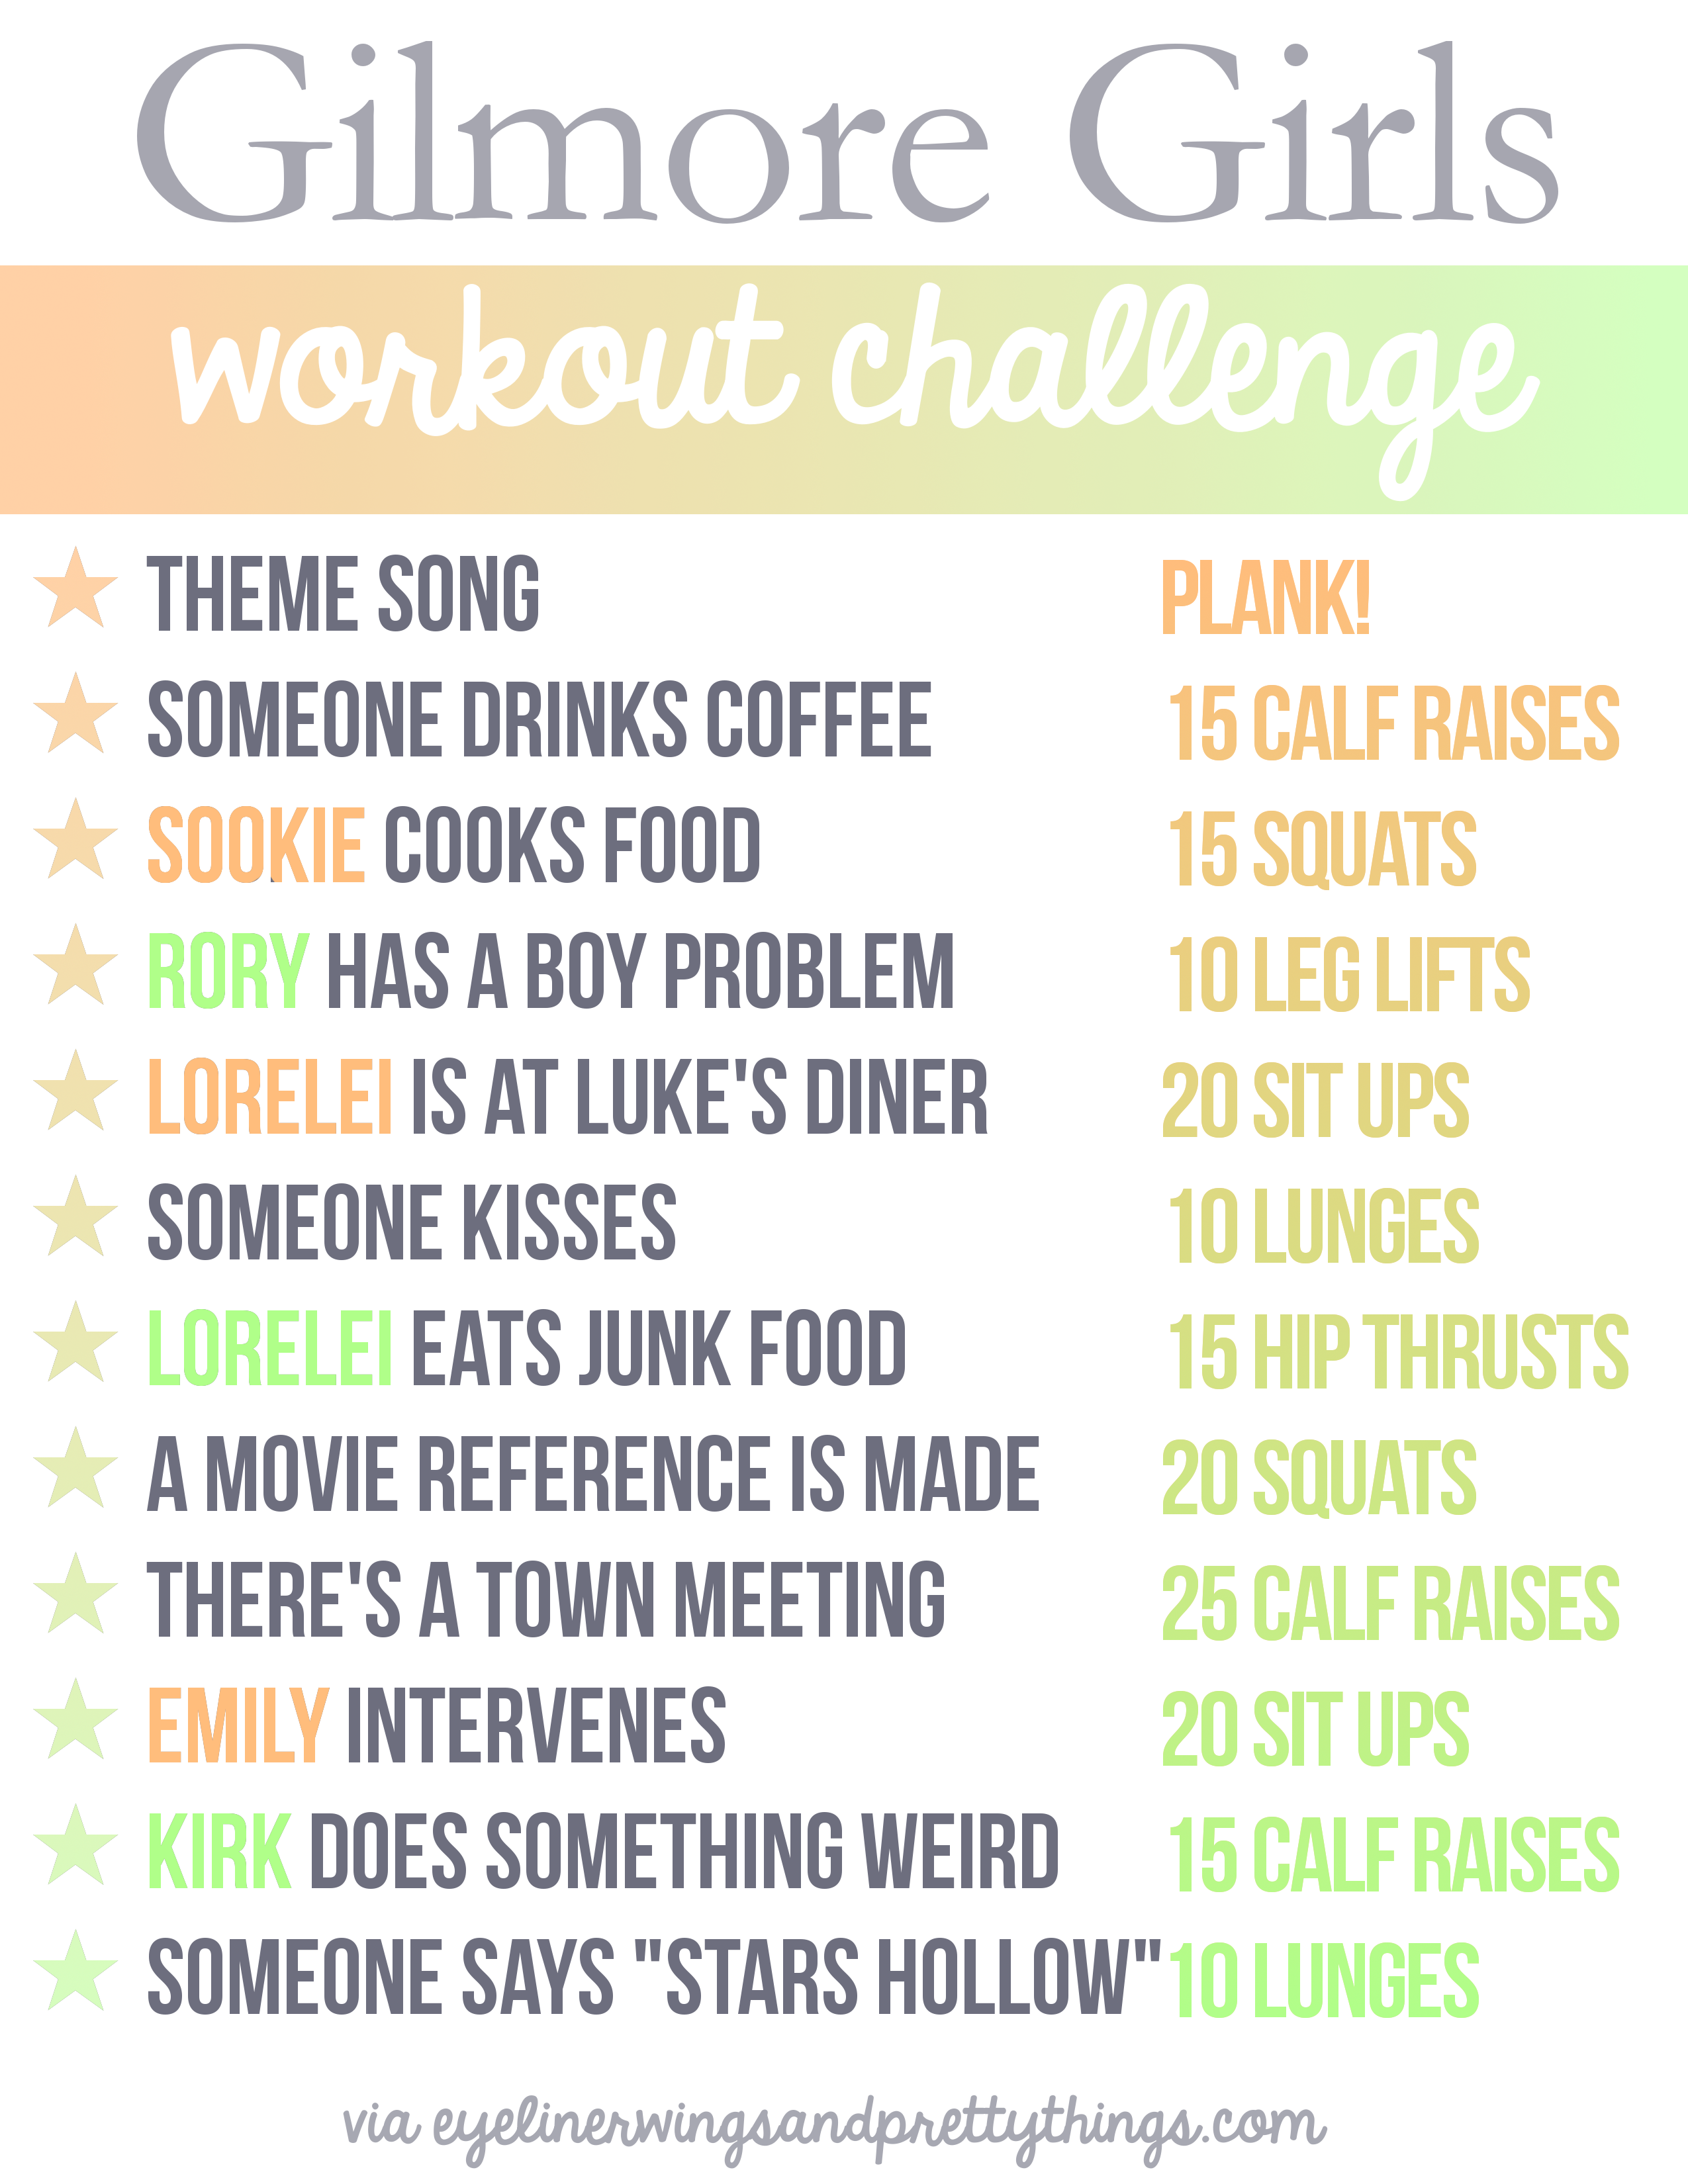 TV WORKOUTS - Gilmore Girls Workout Challenge // eyeliner wings & pretty things